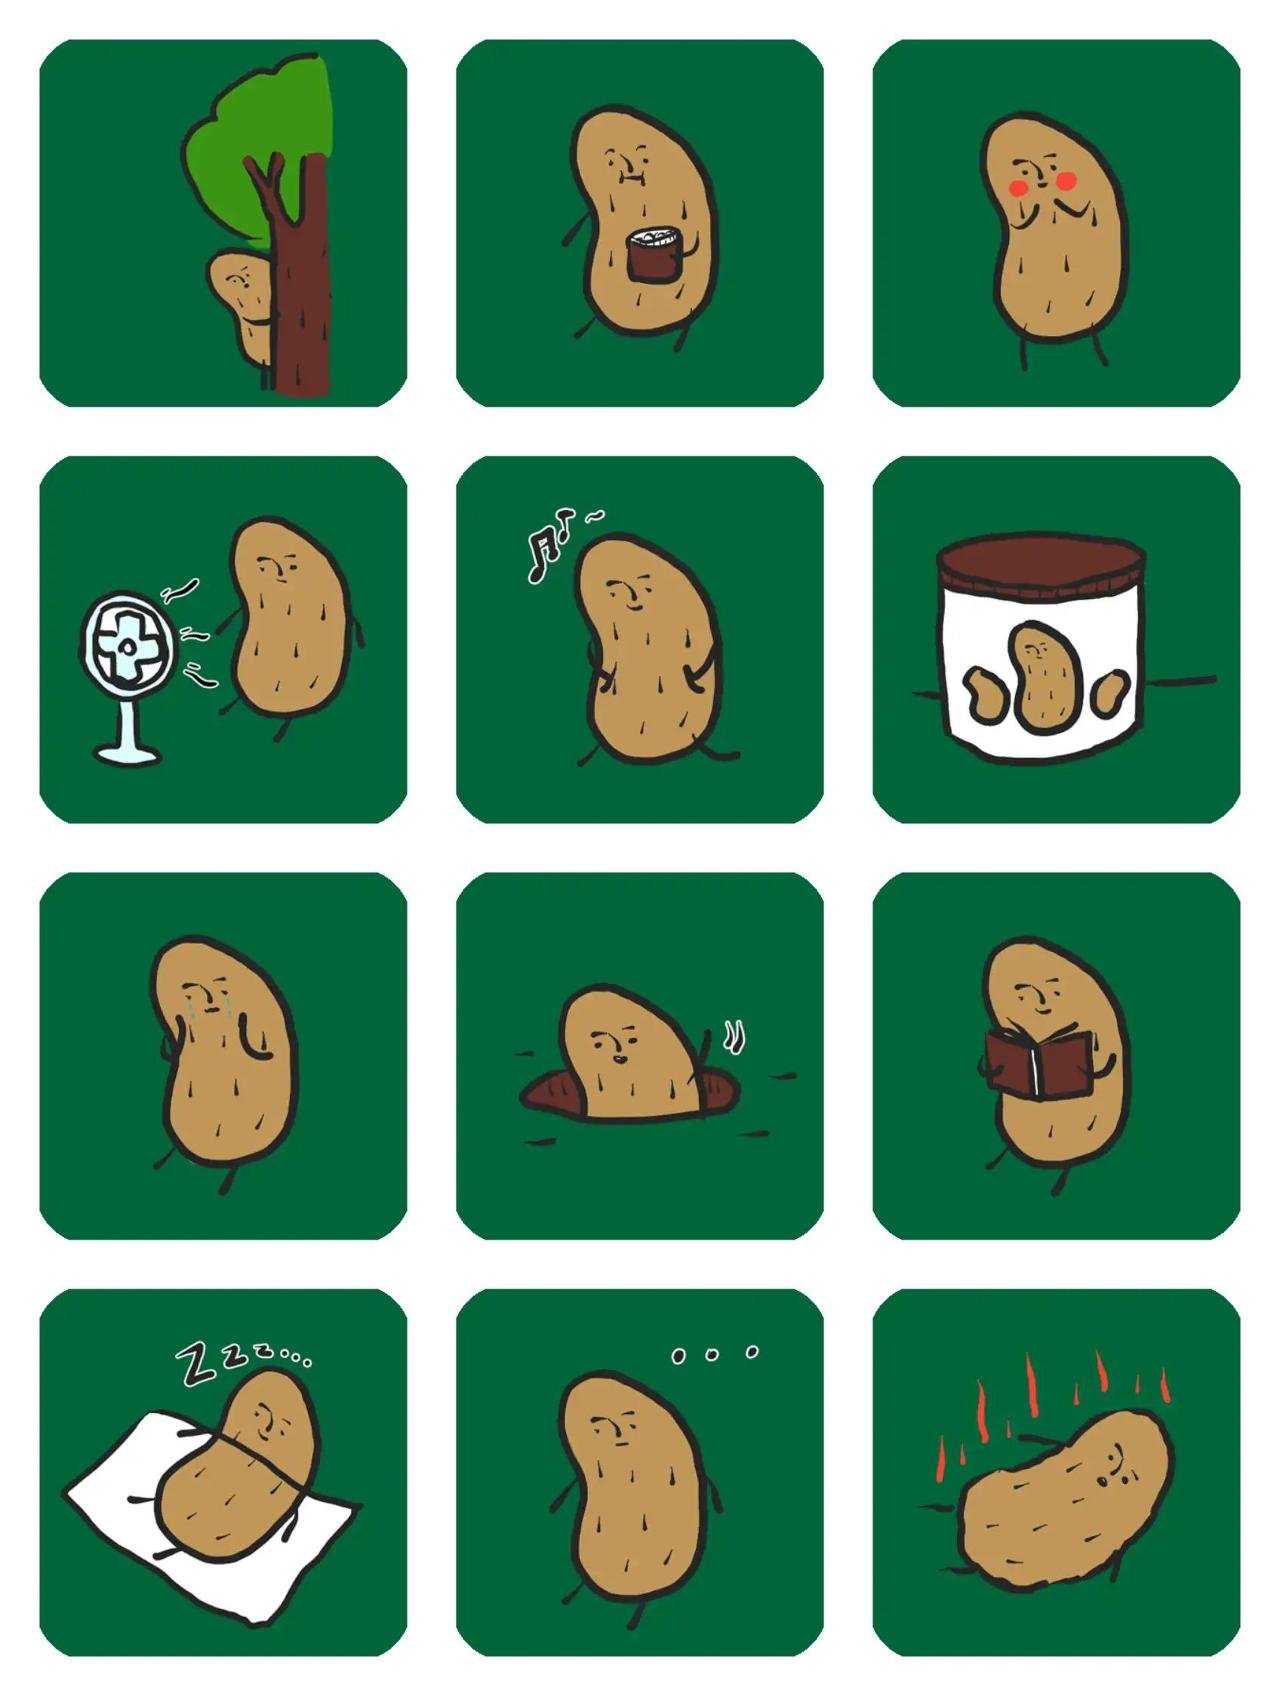 Happy peanut 01 Animation/Cartoon,Food/Drink sticker pack for Whatsapp, Telegram, Signal, and others chatting and message apps